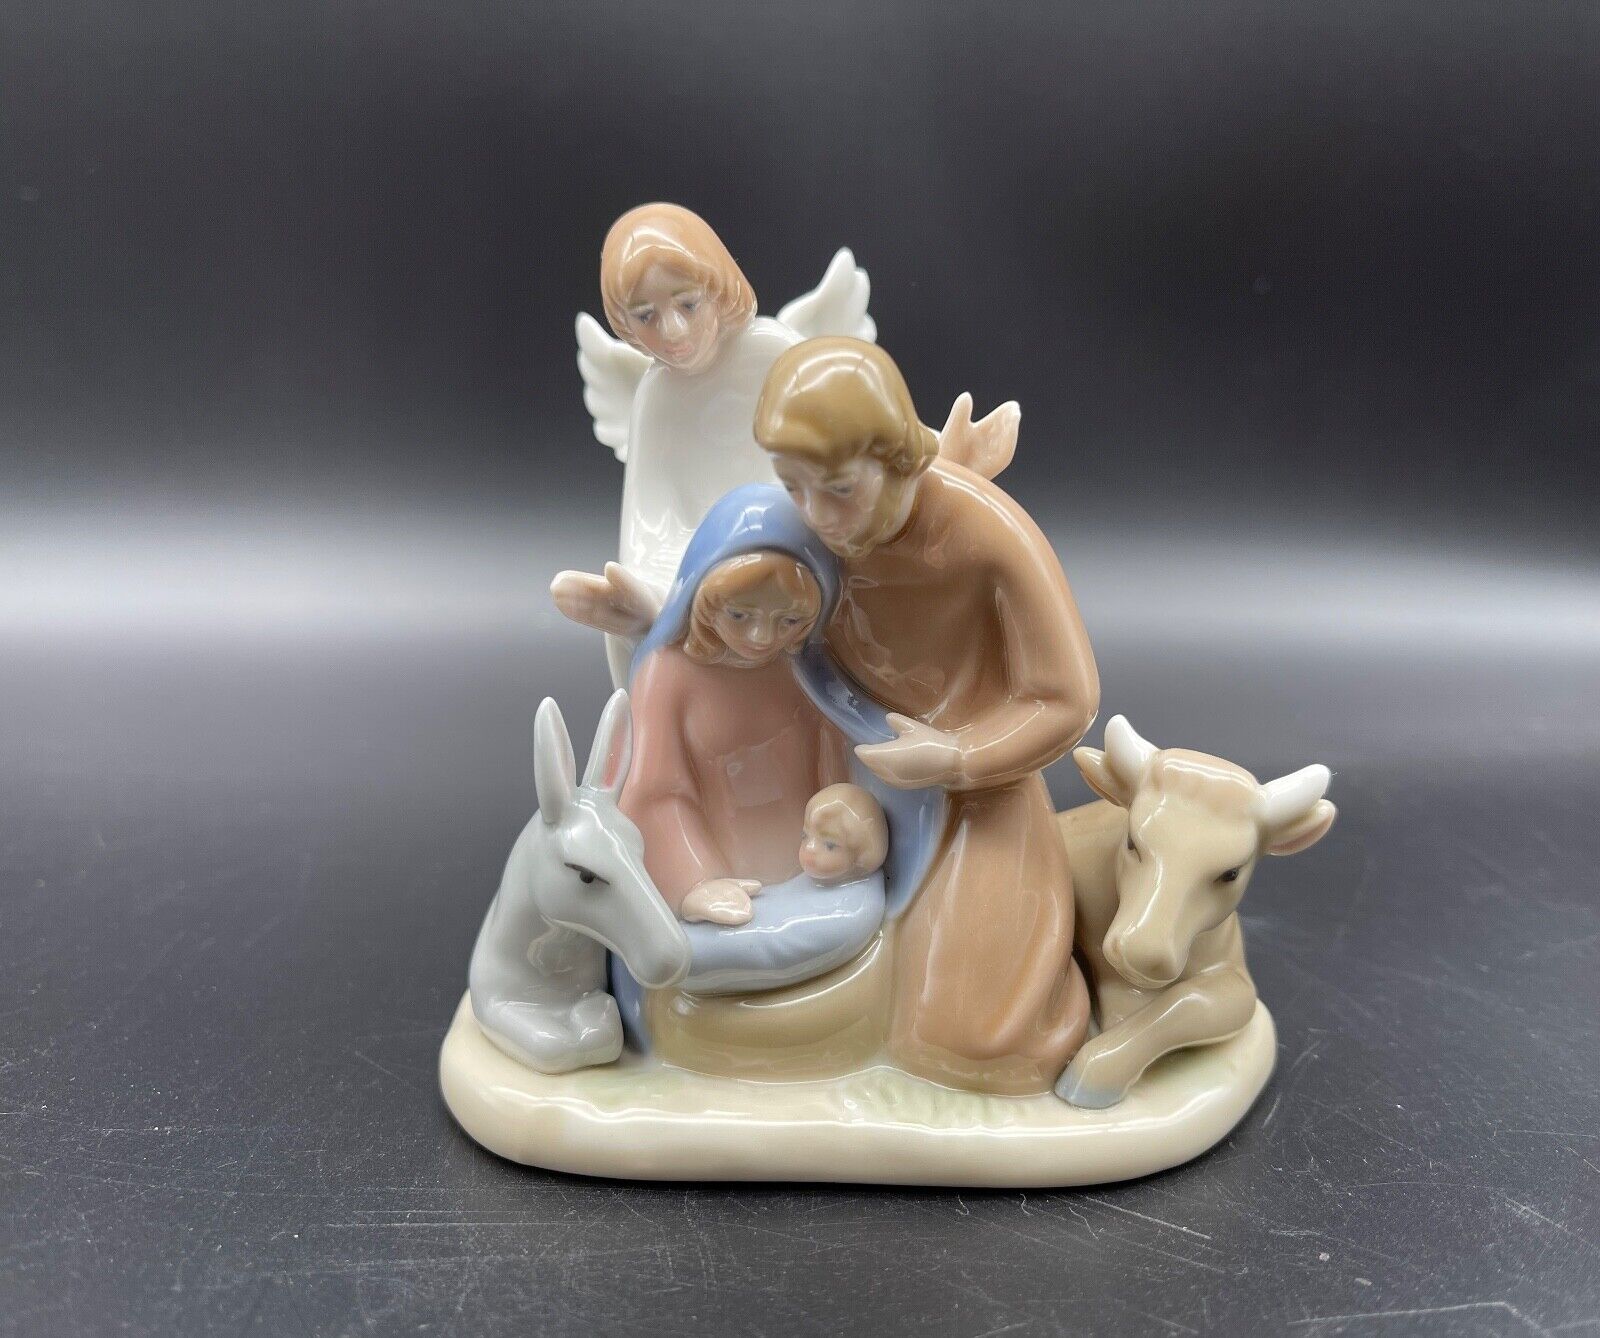 Cosmos Gifts Glossy Porcelain Nativity Holy Family Angel Figurine 3.75”